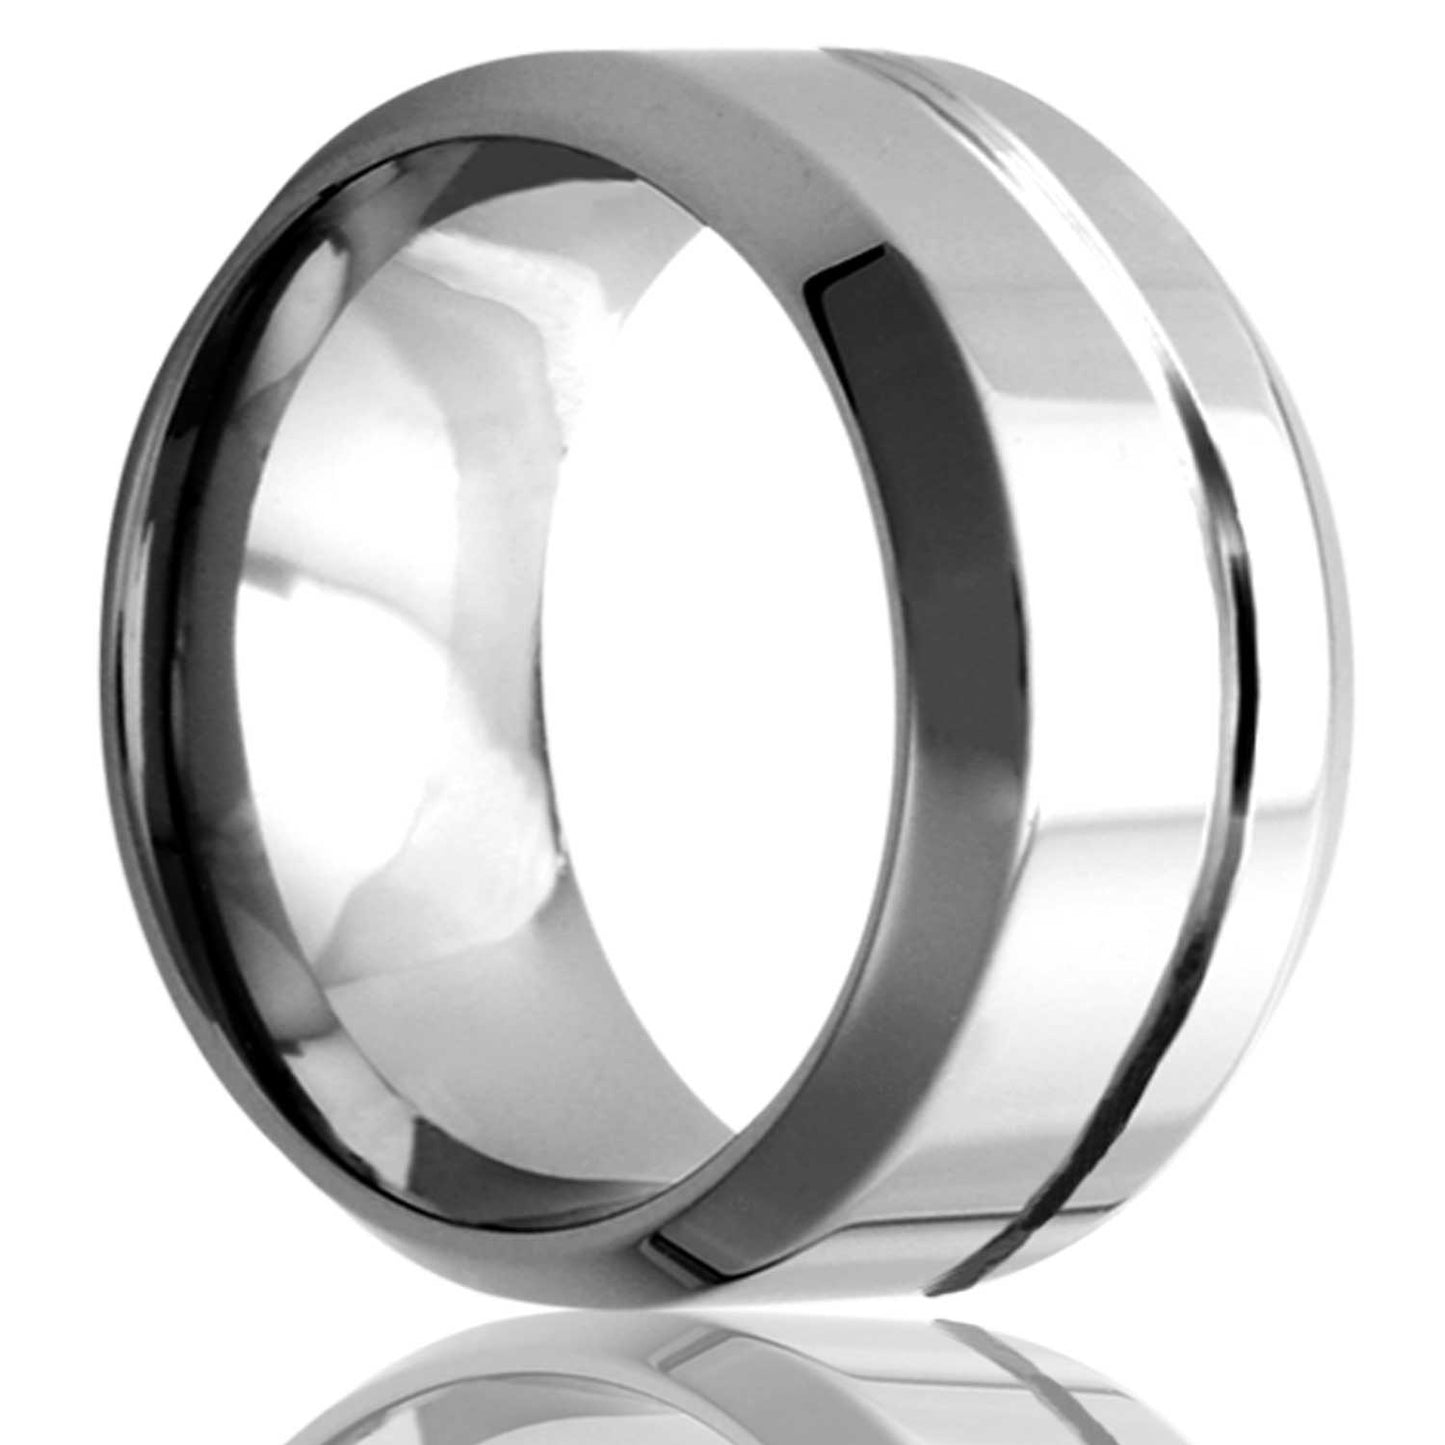 A grooved tungsten wedding band with beveled edges displayed on a neutral white background.